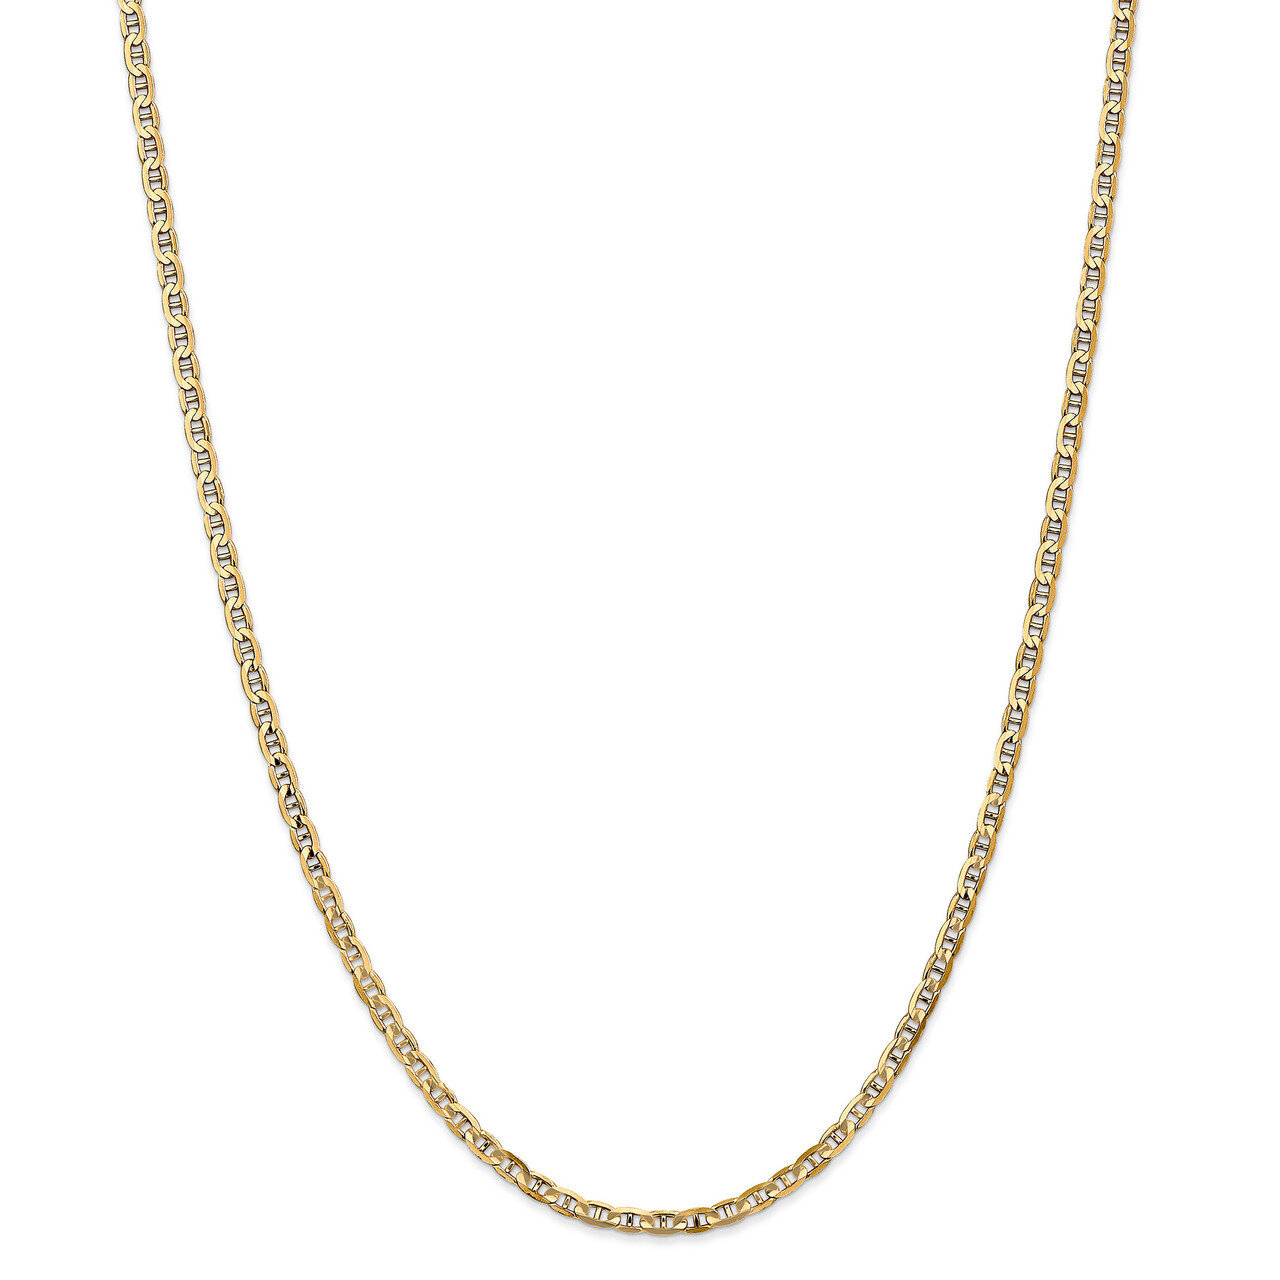 3mm Concave Anchor Chain 22 Inch 14k Gold HB-1314-22